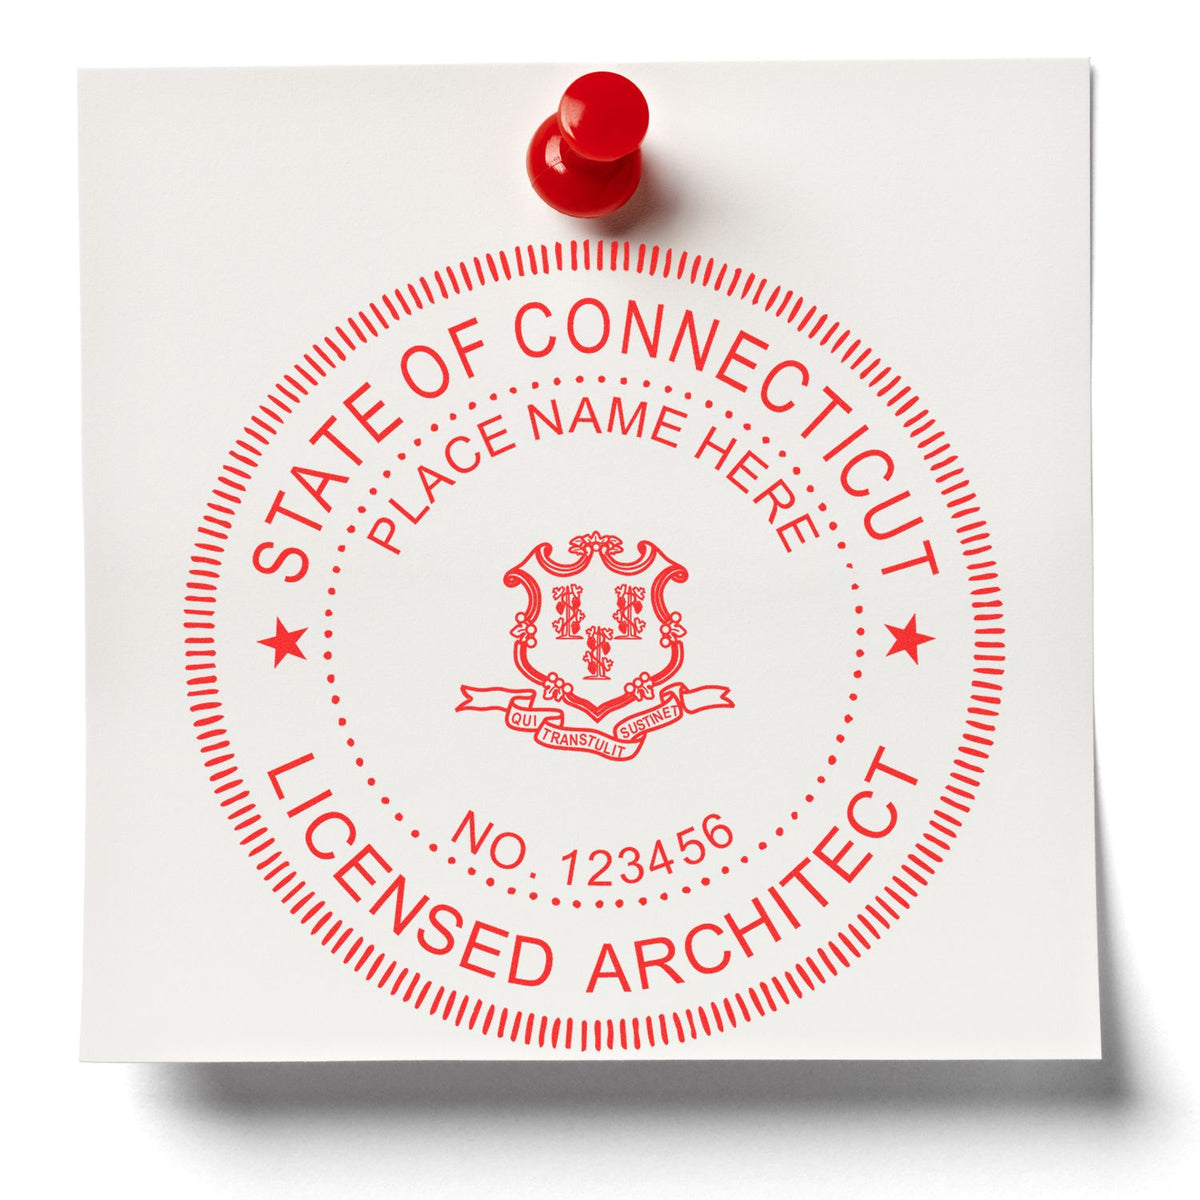 Connecticut Architect Seal Stamp Lifestyle Photo